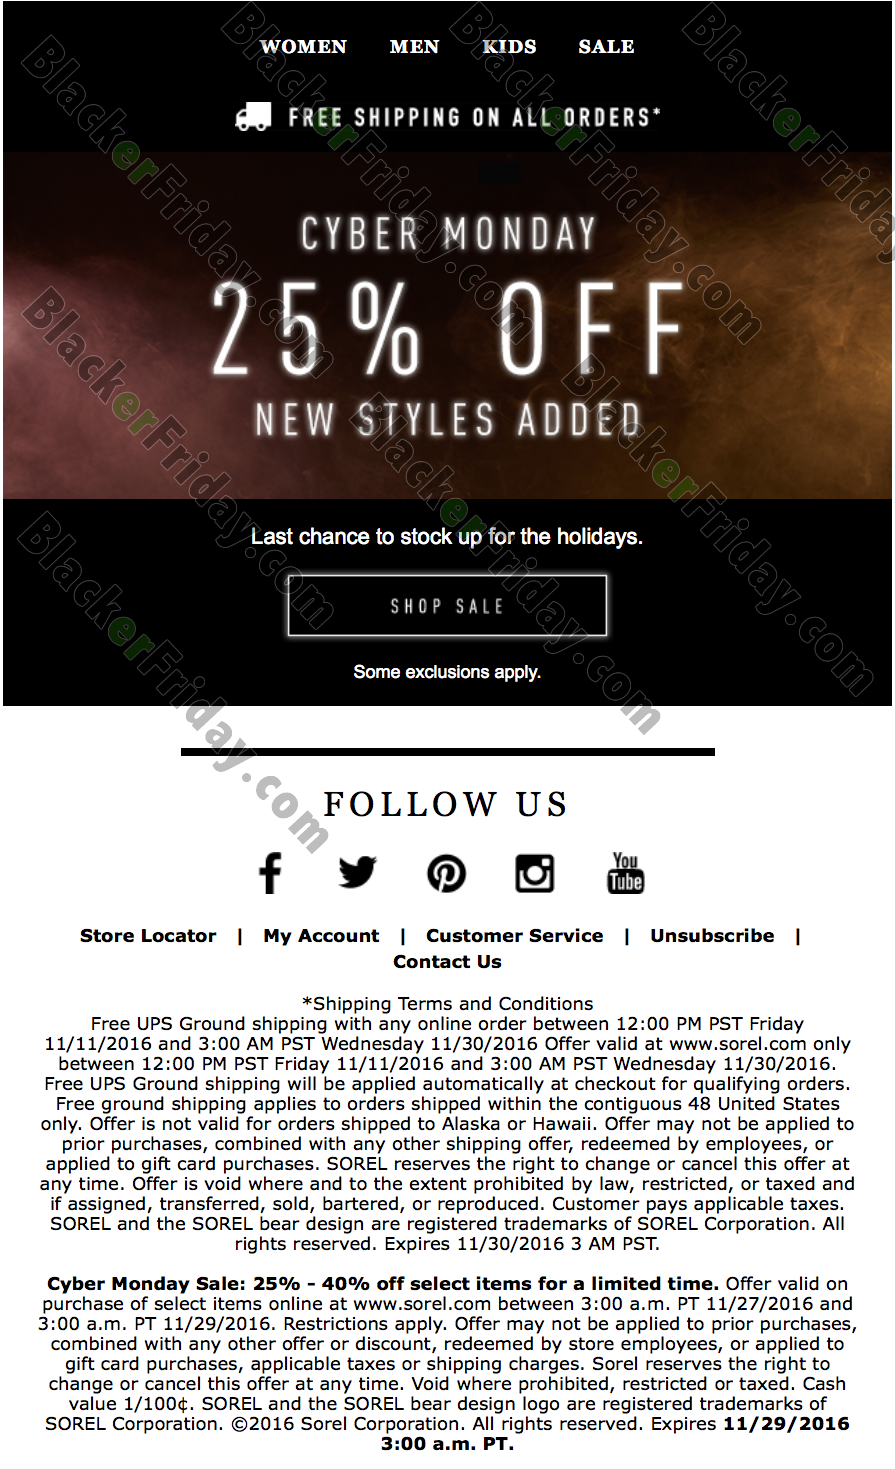 Sorel Cyber Monday 2020 Sale - What to 